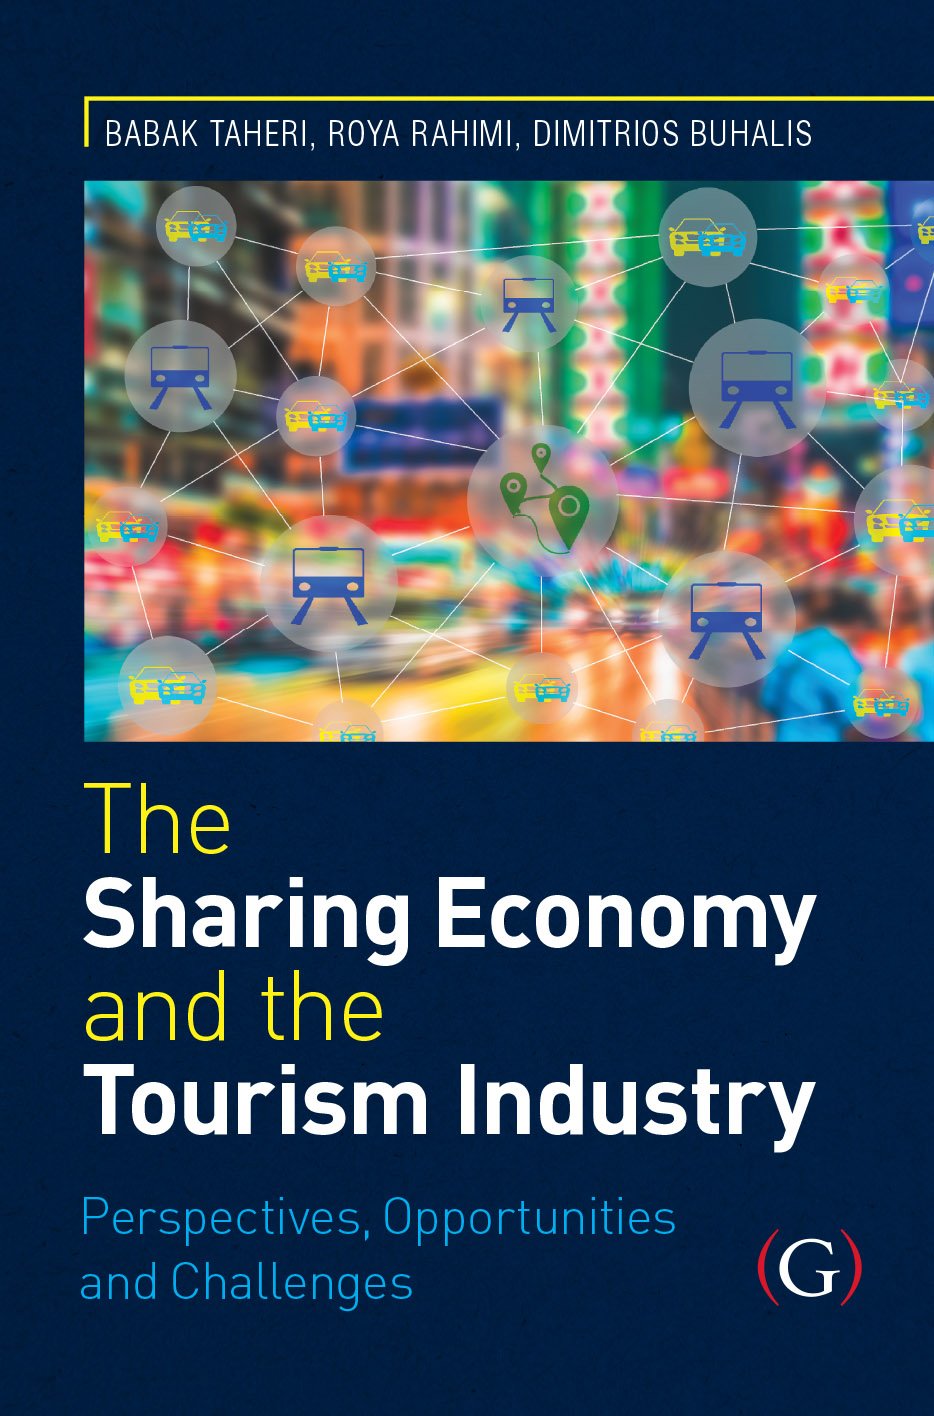 Taheri, B., Rahimi, R. & Buhalis, D. (2022) The Sharing Economy and the Tourism Industry. Oxford: Goodfellow Publishers http://dx.doi.org/10.23912/9781915097